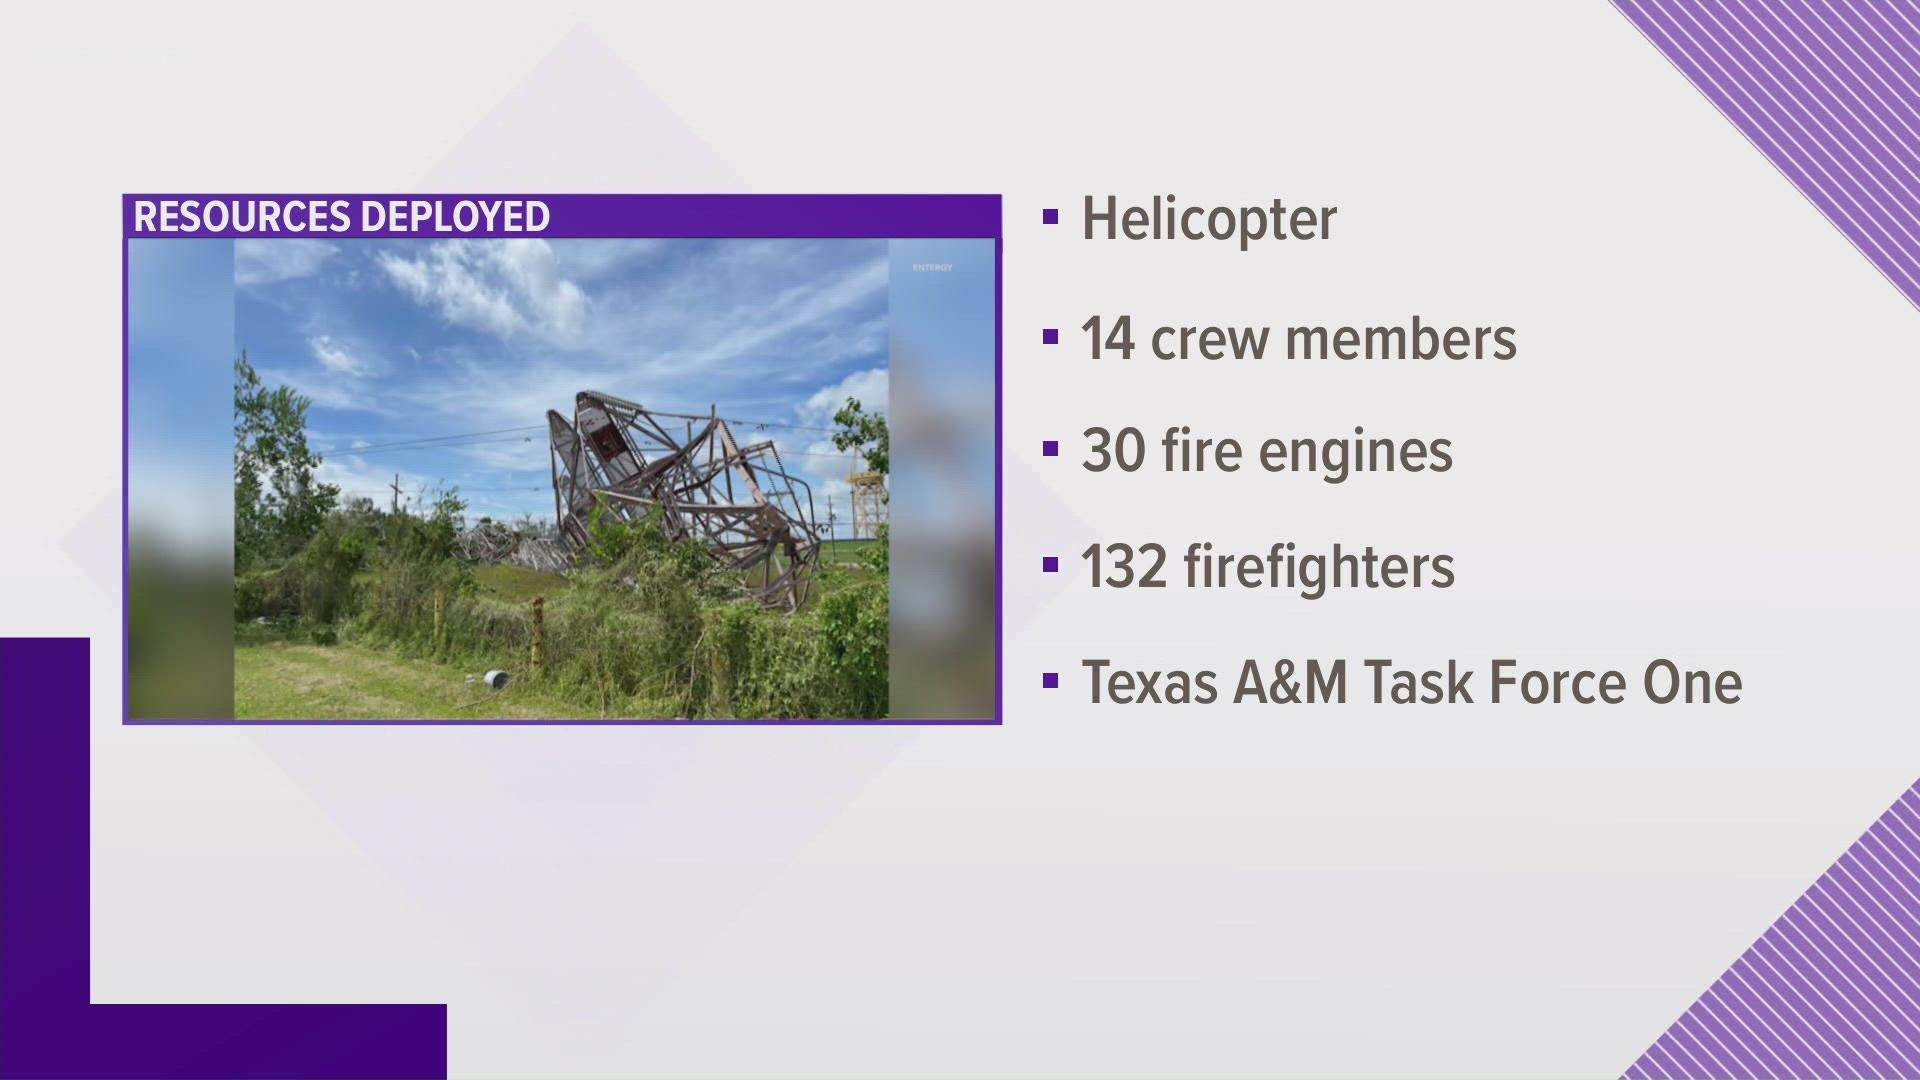 Gov. Greg Abbott said resources include a helicopter, fire engines, firefighters and a search and rescue team.